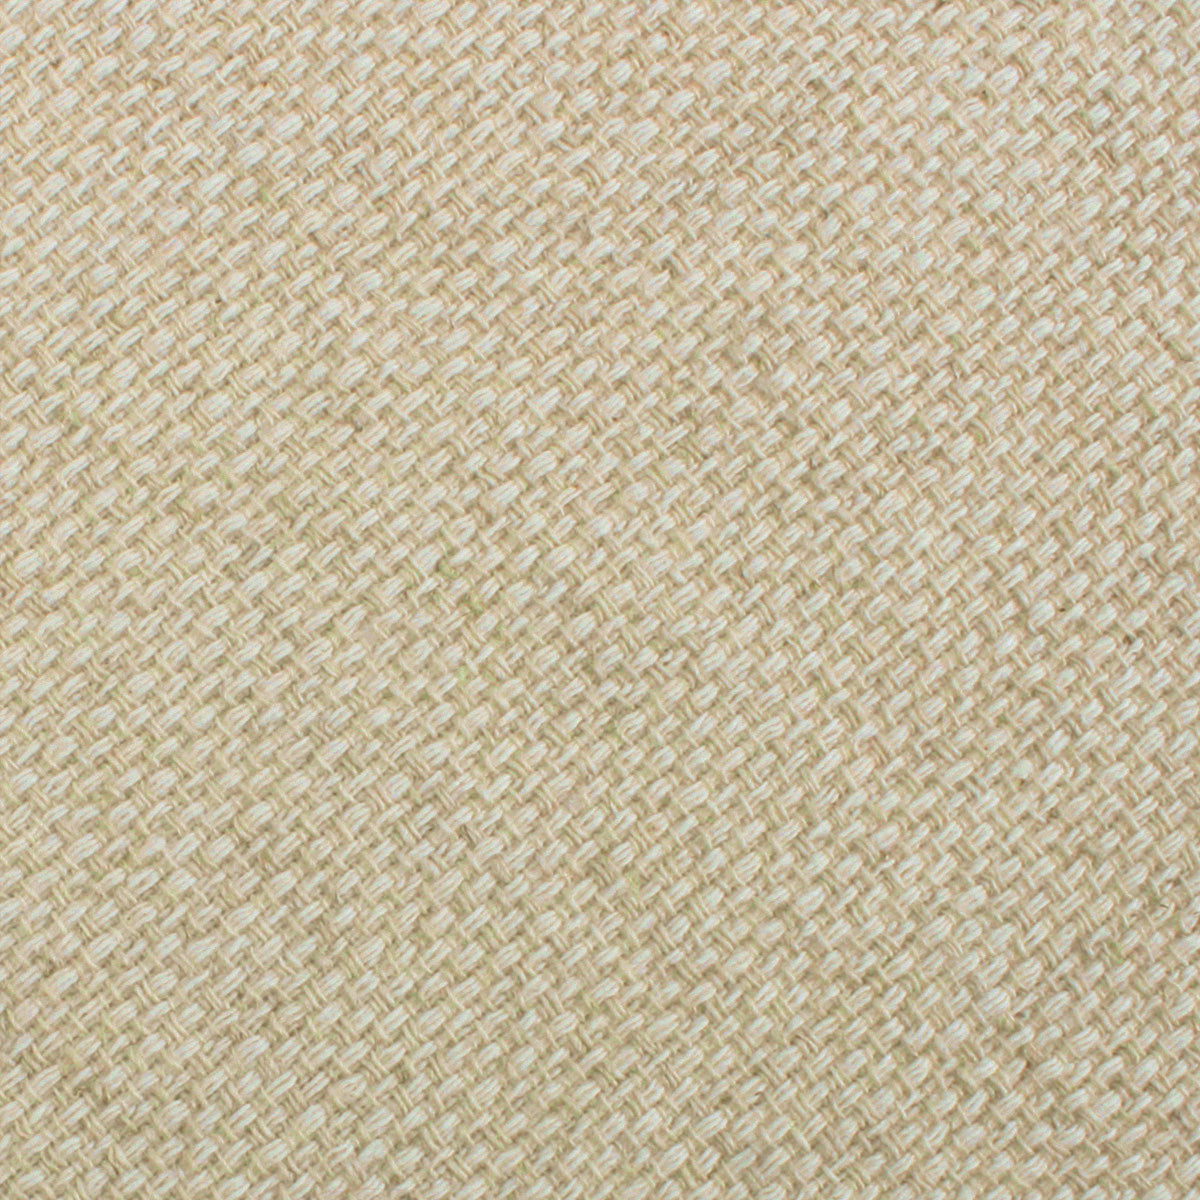 Champagne Basket Weave Linen Self Bow Tie Fabric